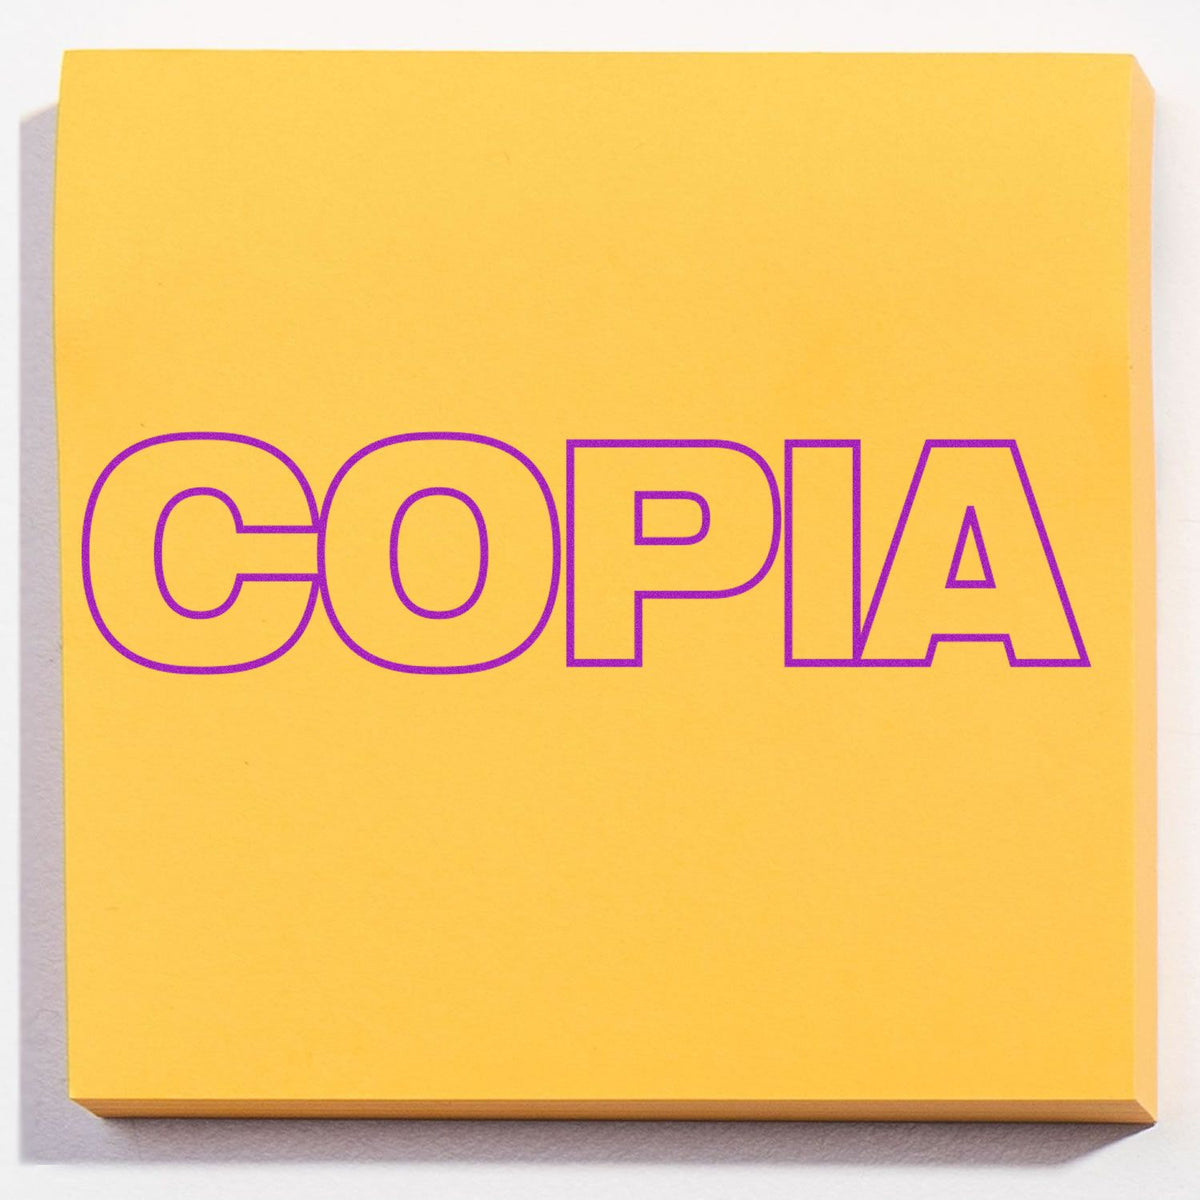 Large Copia Rubber Stamp In Use